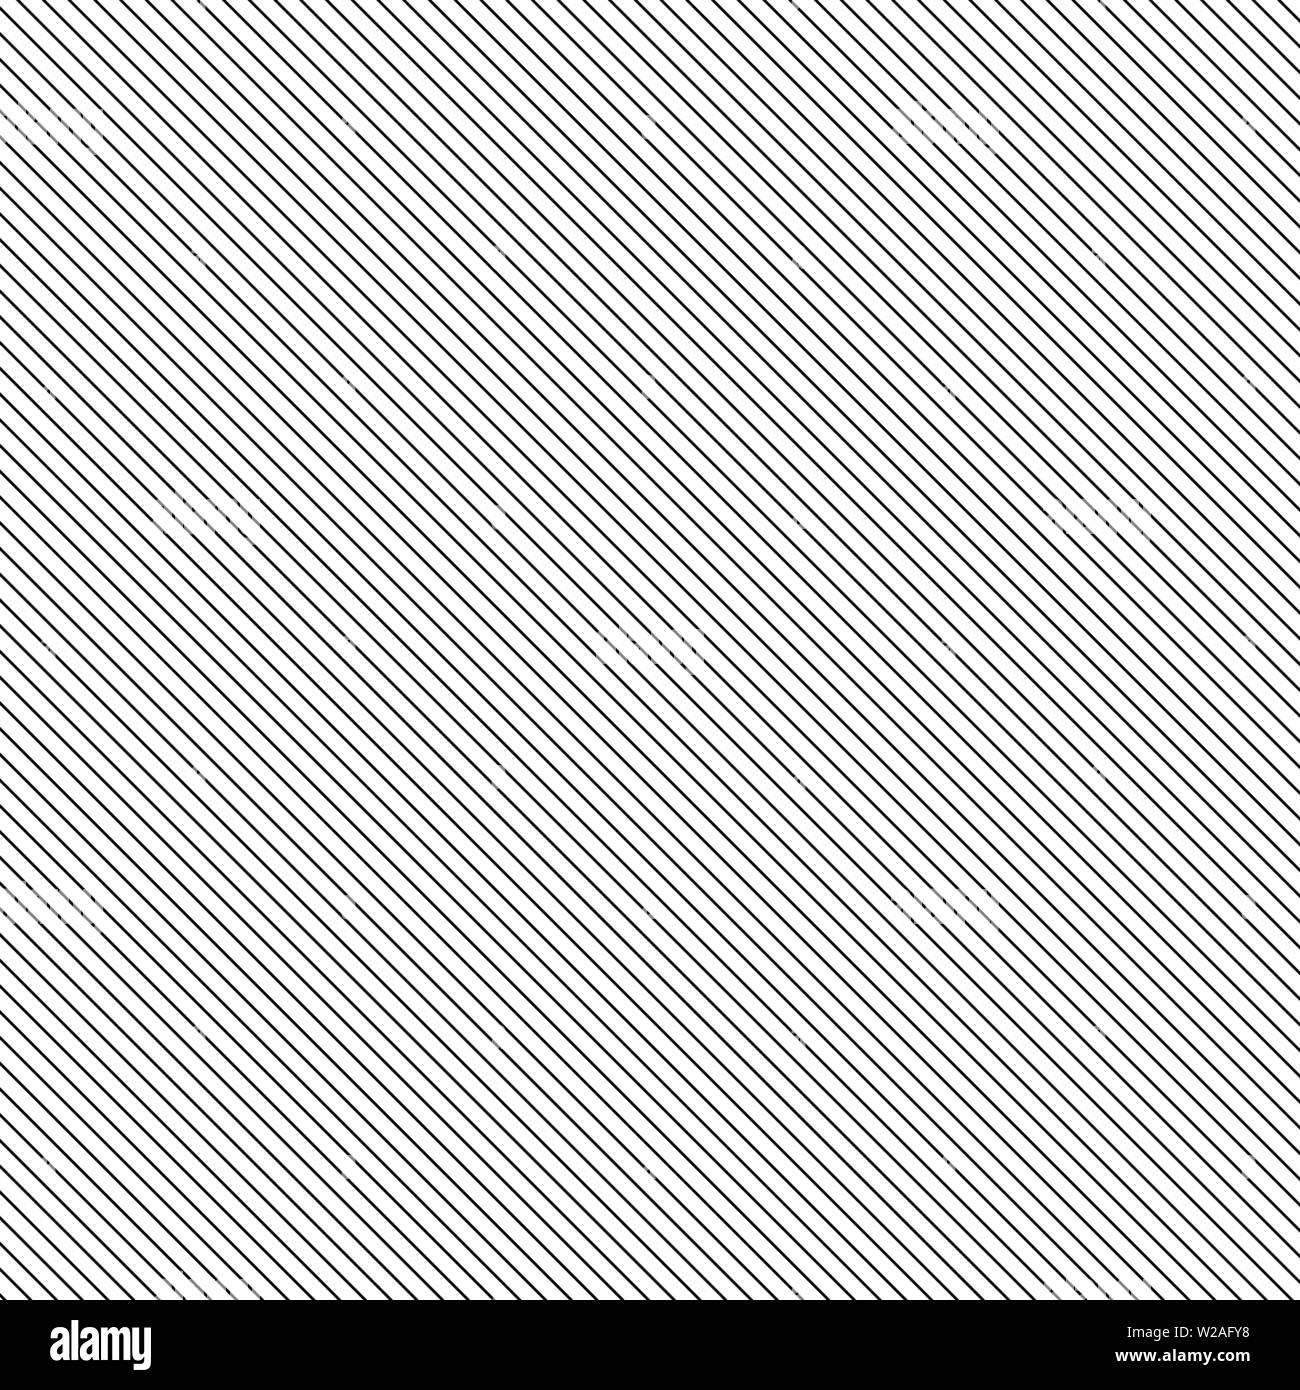 Diagonal lines on white background. Abstract pattern with diagonal ...